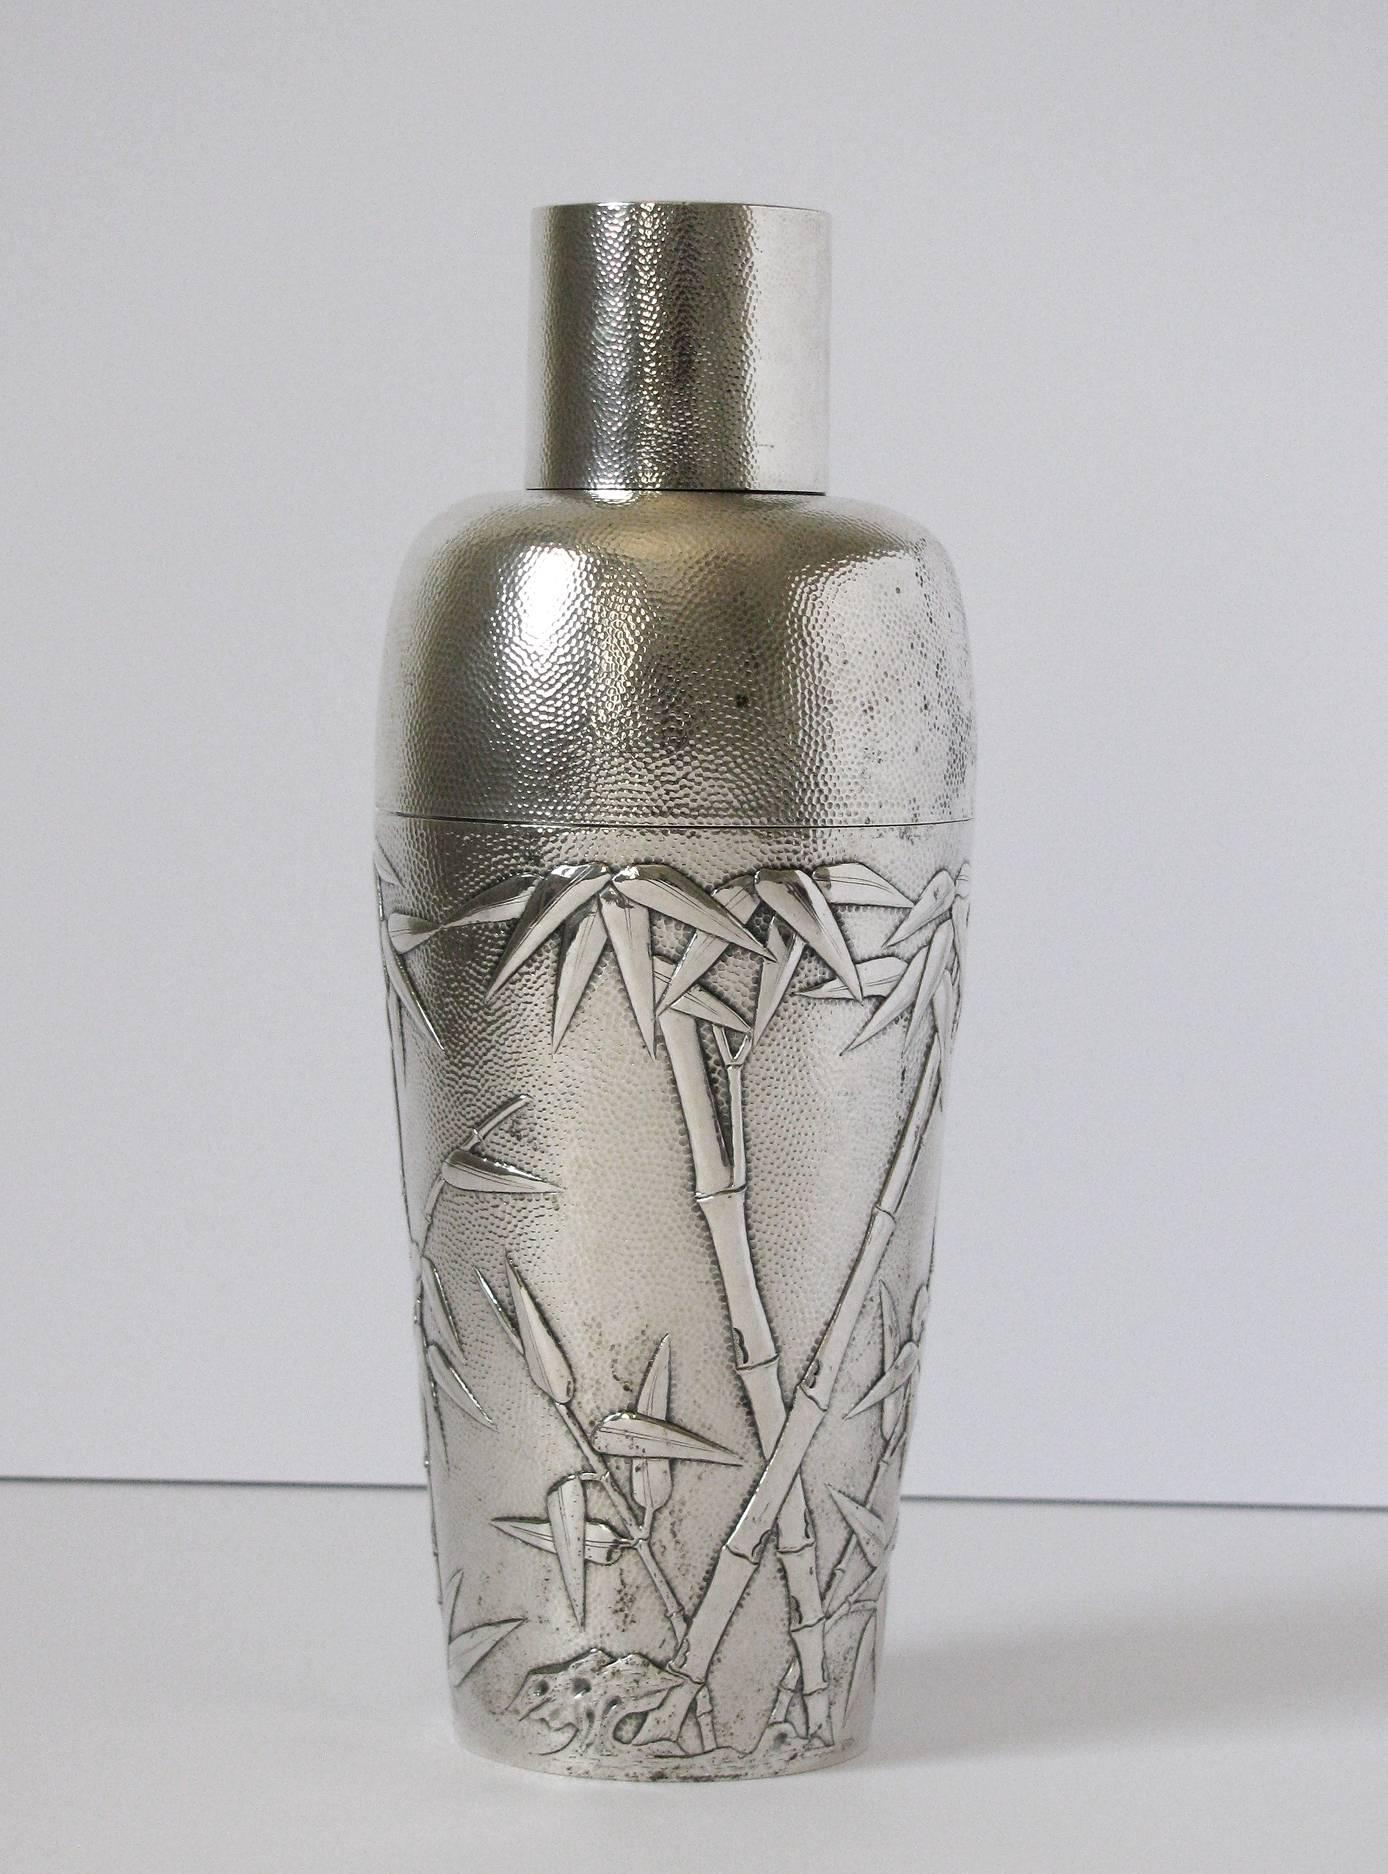 A rare and important Chinese export silver cocktail shaker by Hung Chong, Canton or Shanghai. The finely detailed embossed bamboo decoration, with the detachable strainer and cap, engraved R S R monogram to the cap and 'Pay Department U.S.S.